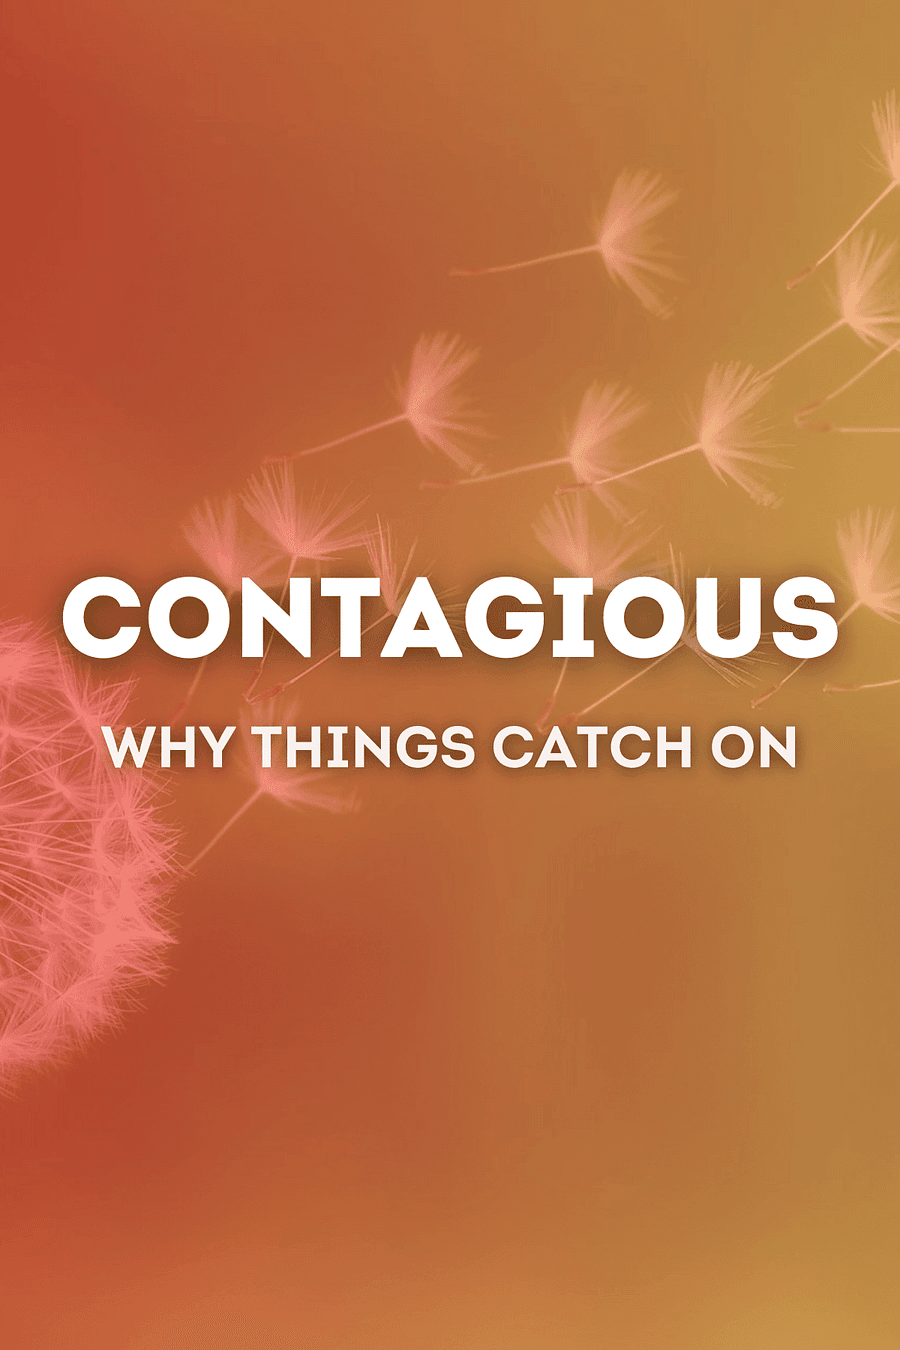 Contagious by Jonah Berger - Book Summary